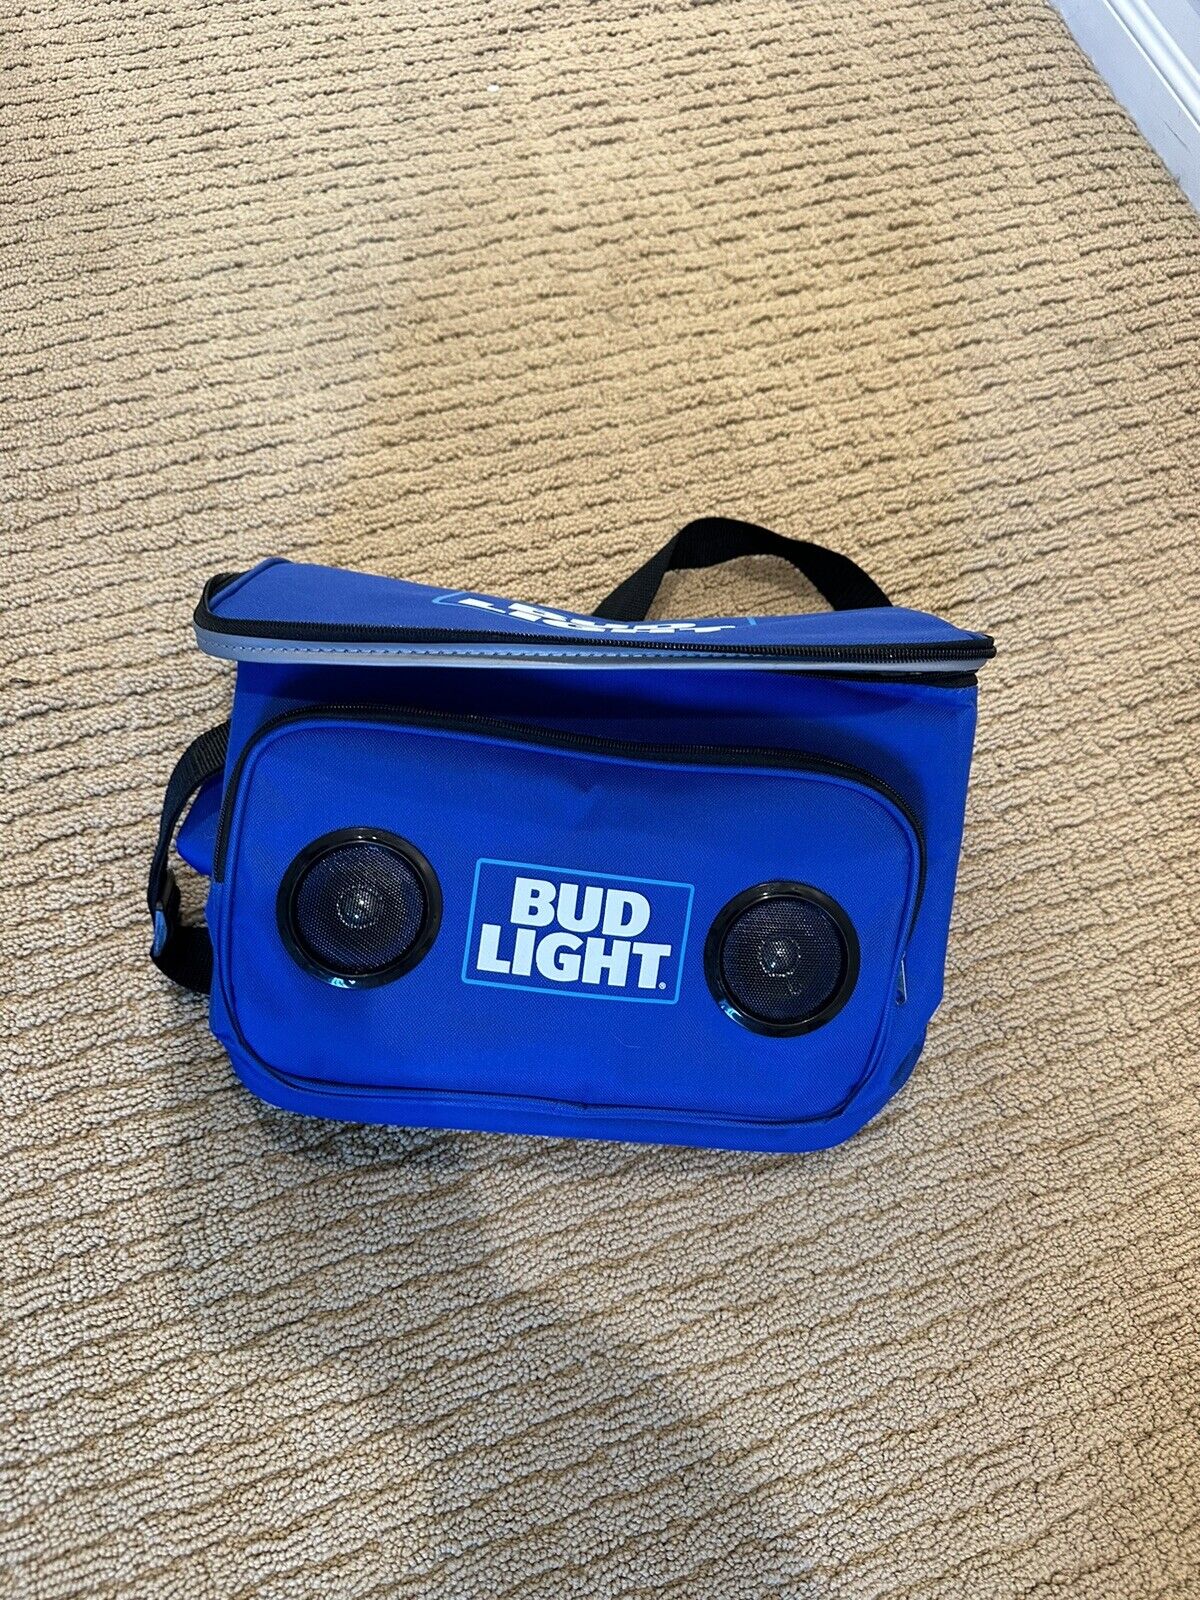 Bud Light Bluetooth Cooler Speaker With Bottle Opener & 2 Can Coolers